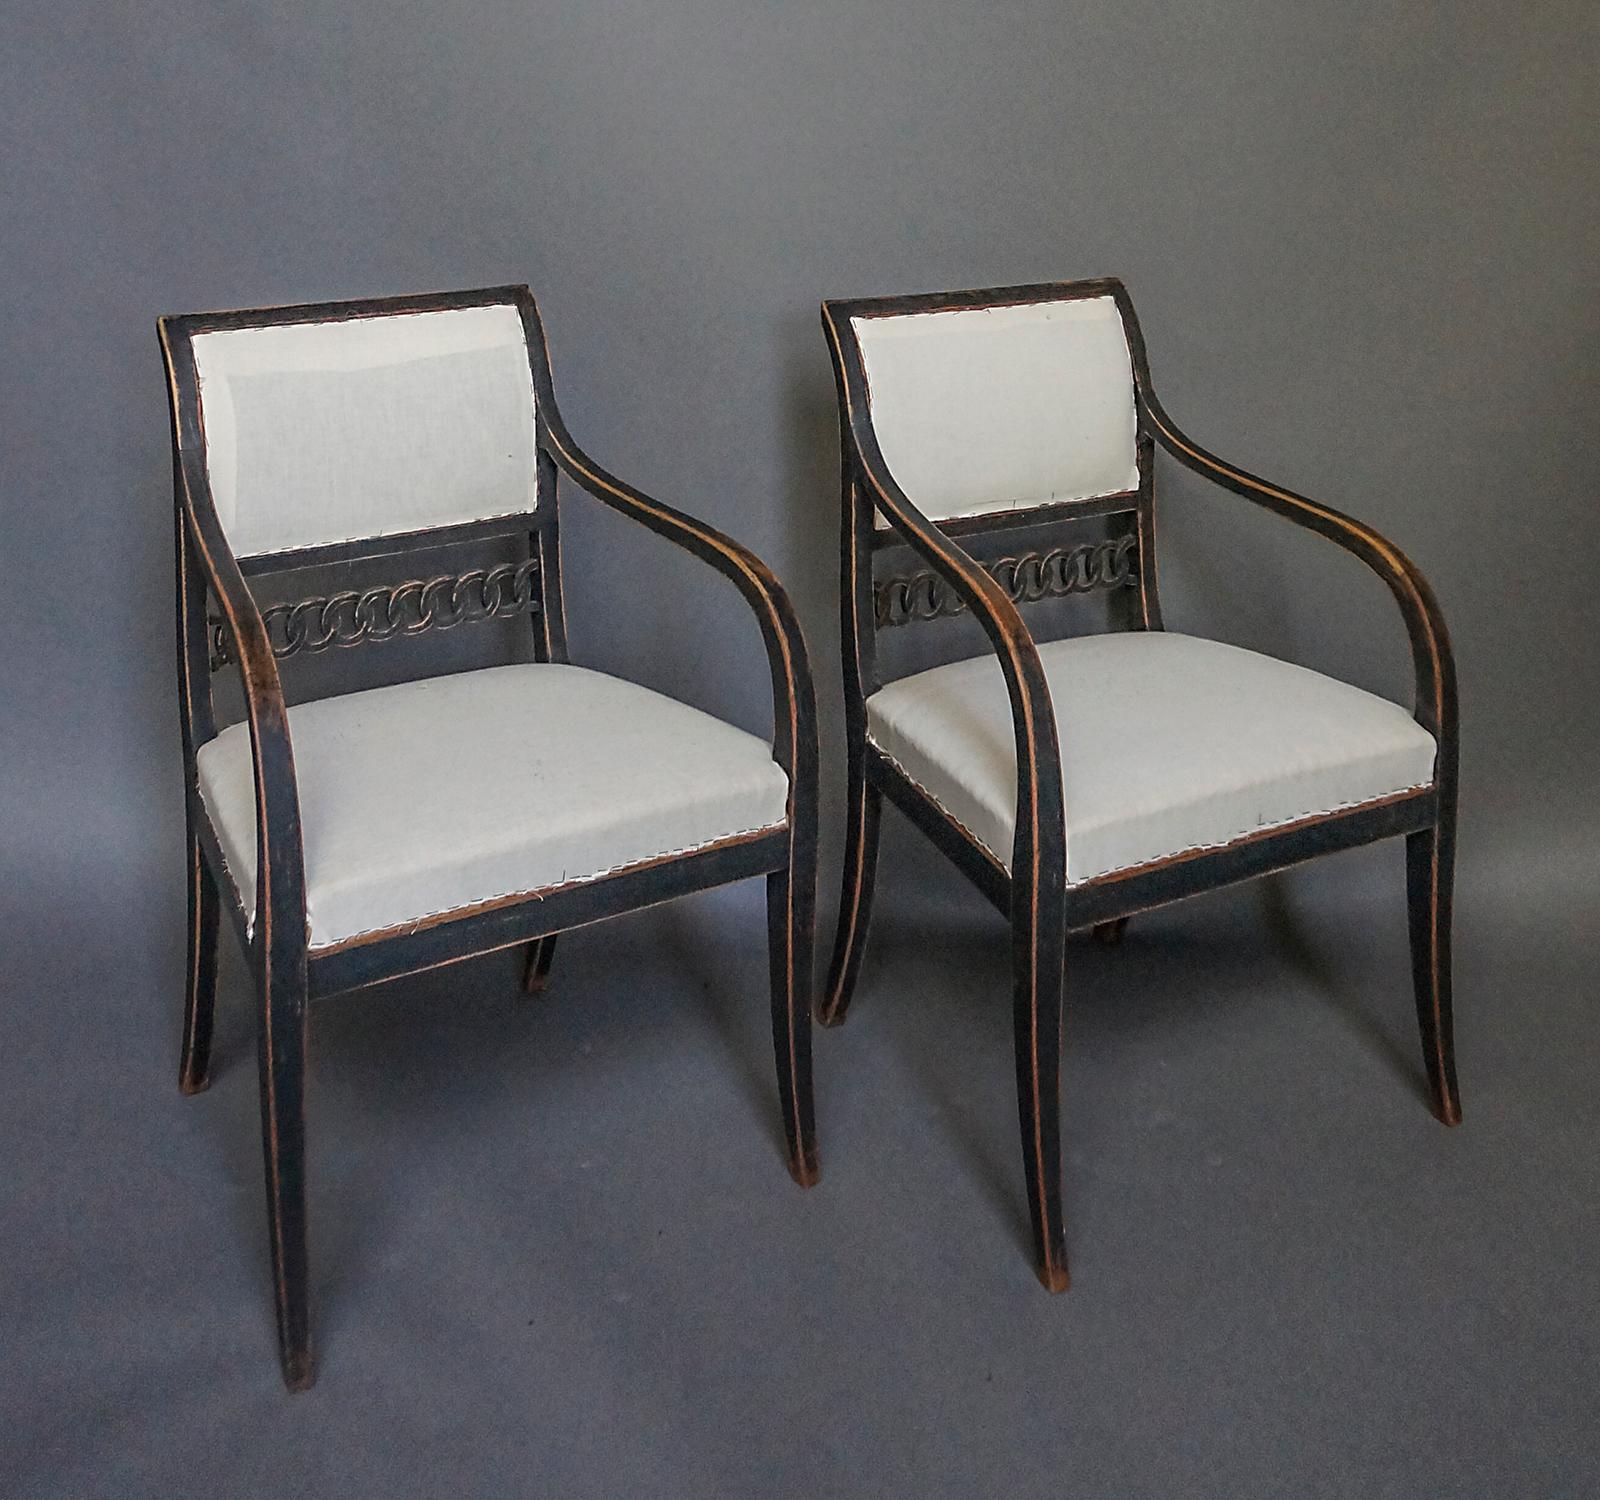 Pair of neoclassical armchairs, Sweden circa 1830, with later black paint. Square backs with a wide rail of interlocking rings below the upholstered panel. The curved arms extend down into the tapering saber legs. Graceful, sturdy and quite